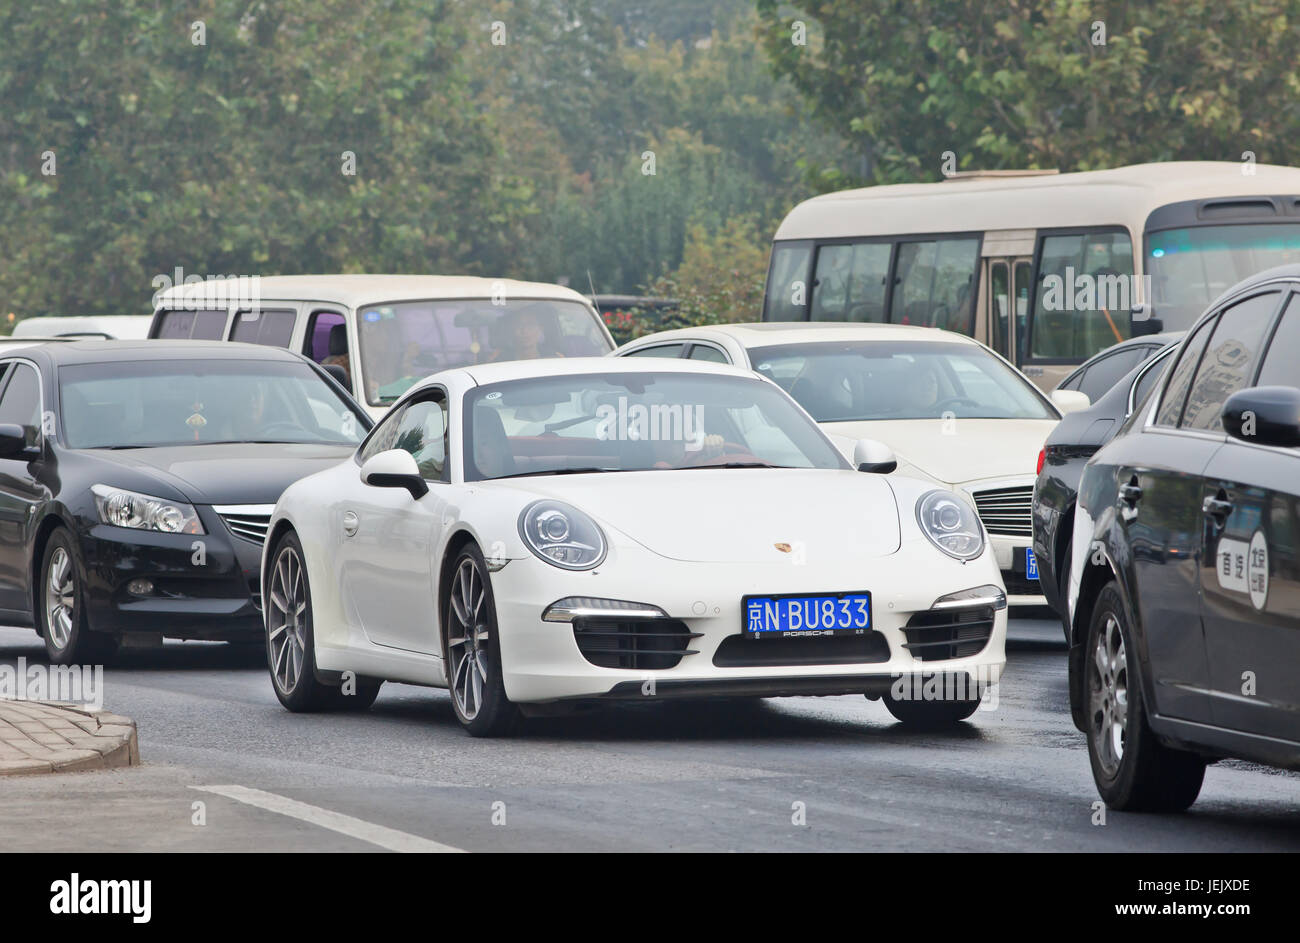 BEIJING-OCTOBER 19, 2014. Porsche 911 Carrera in Beijing traffic jam. About 120,000 luxury cars were imported into China last year. Stock Photo